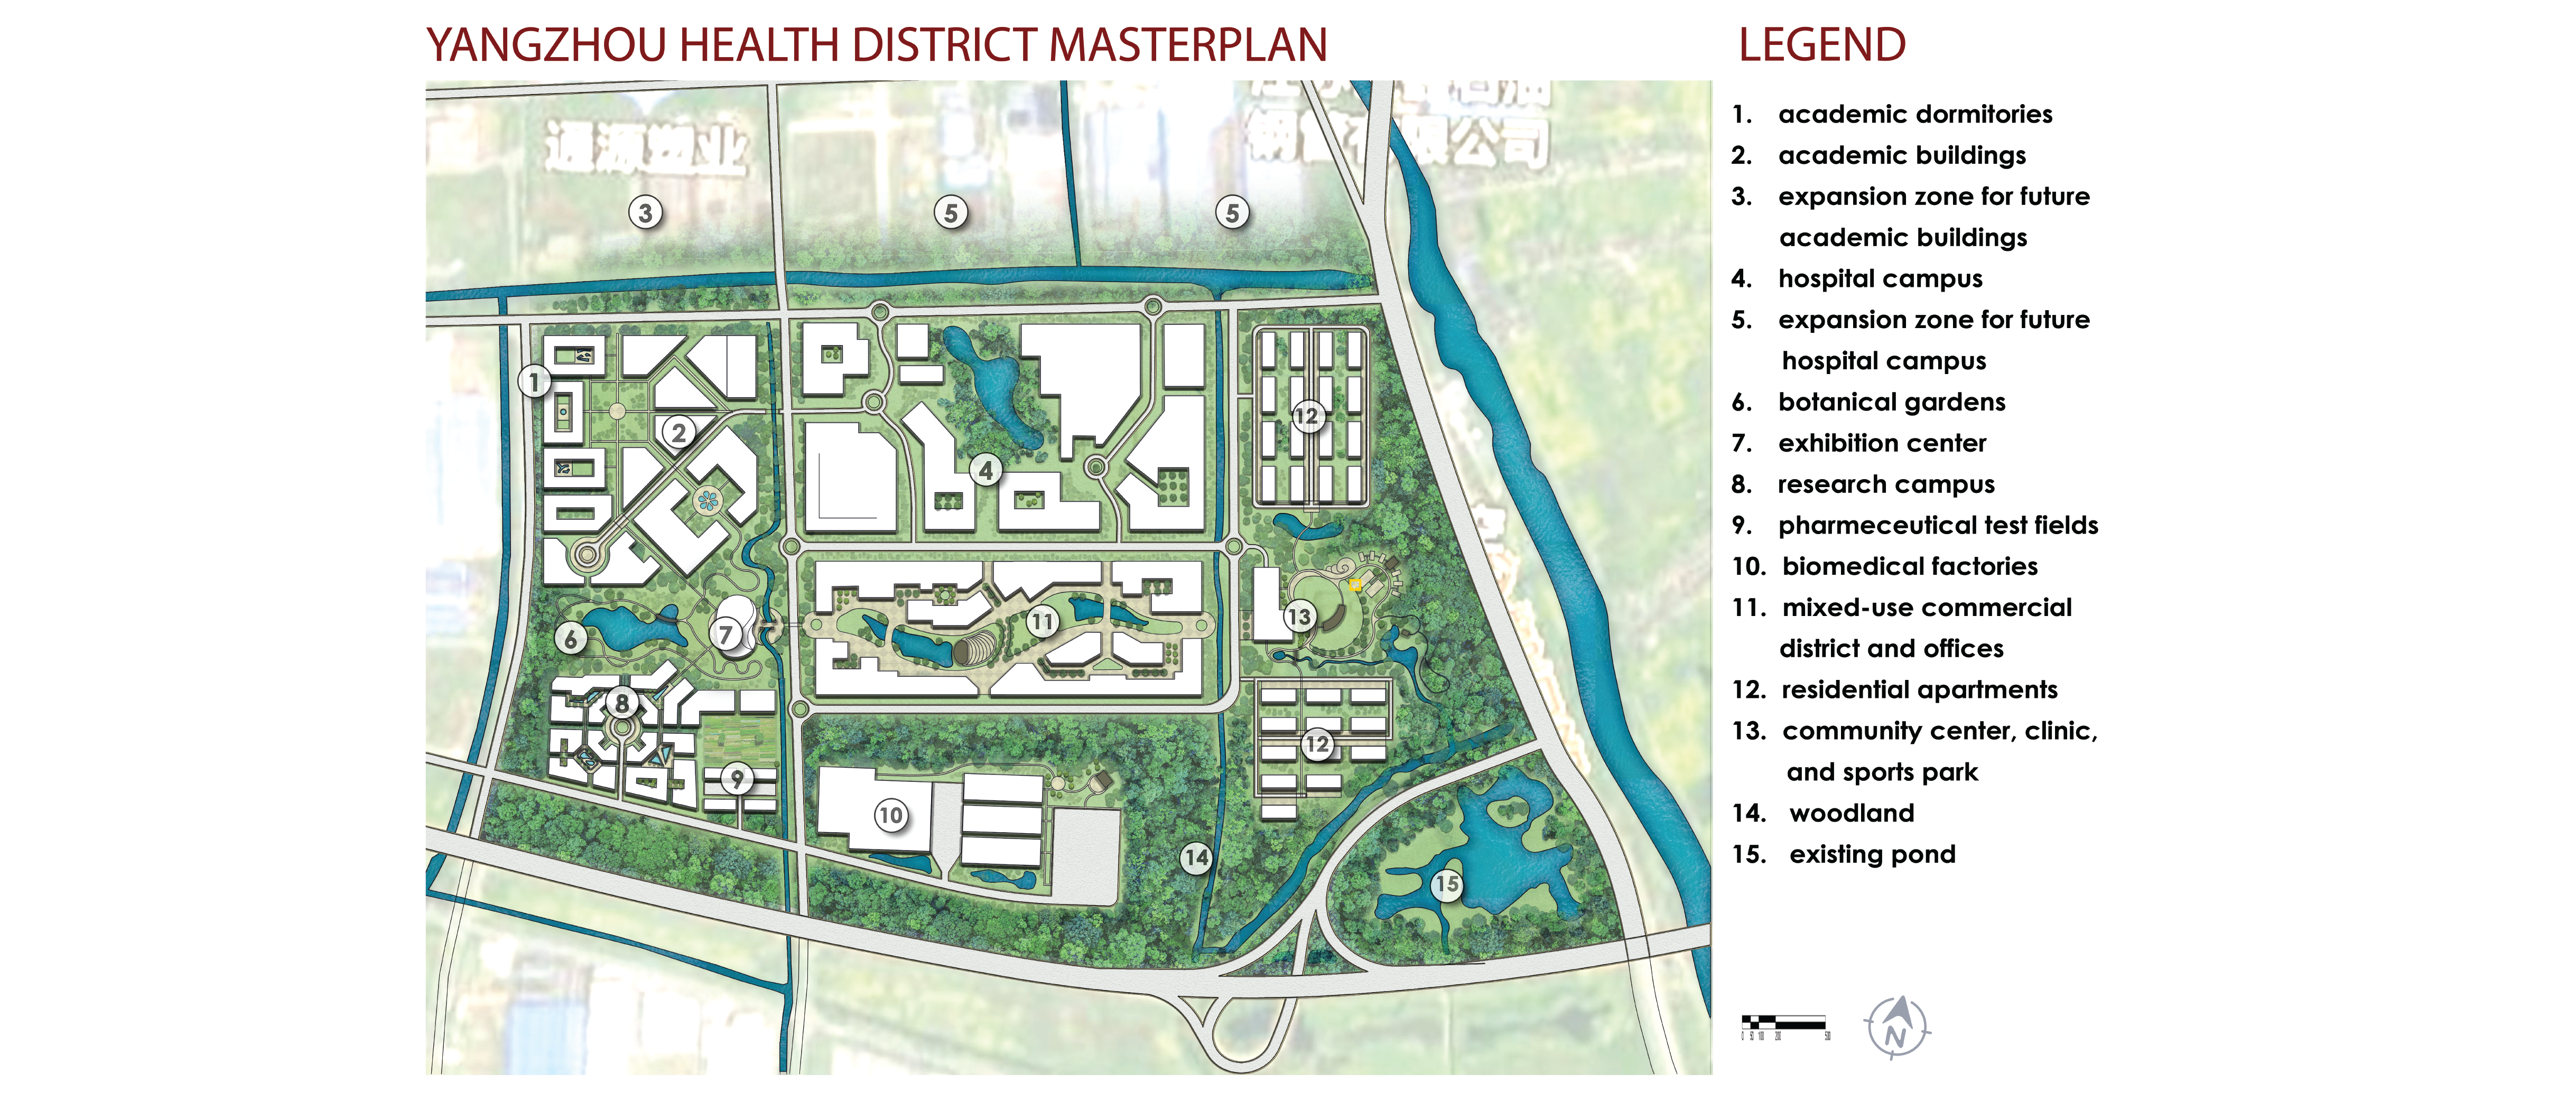 Yangzhou's New Medical District | Molly Foote | LARCH 8520 | Professor Nassar